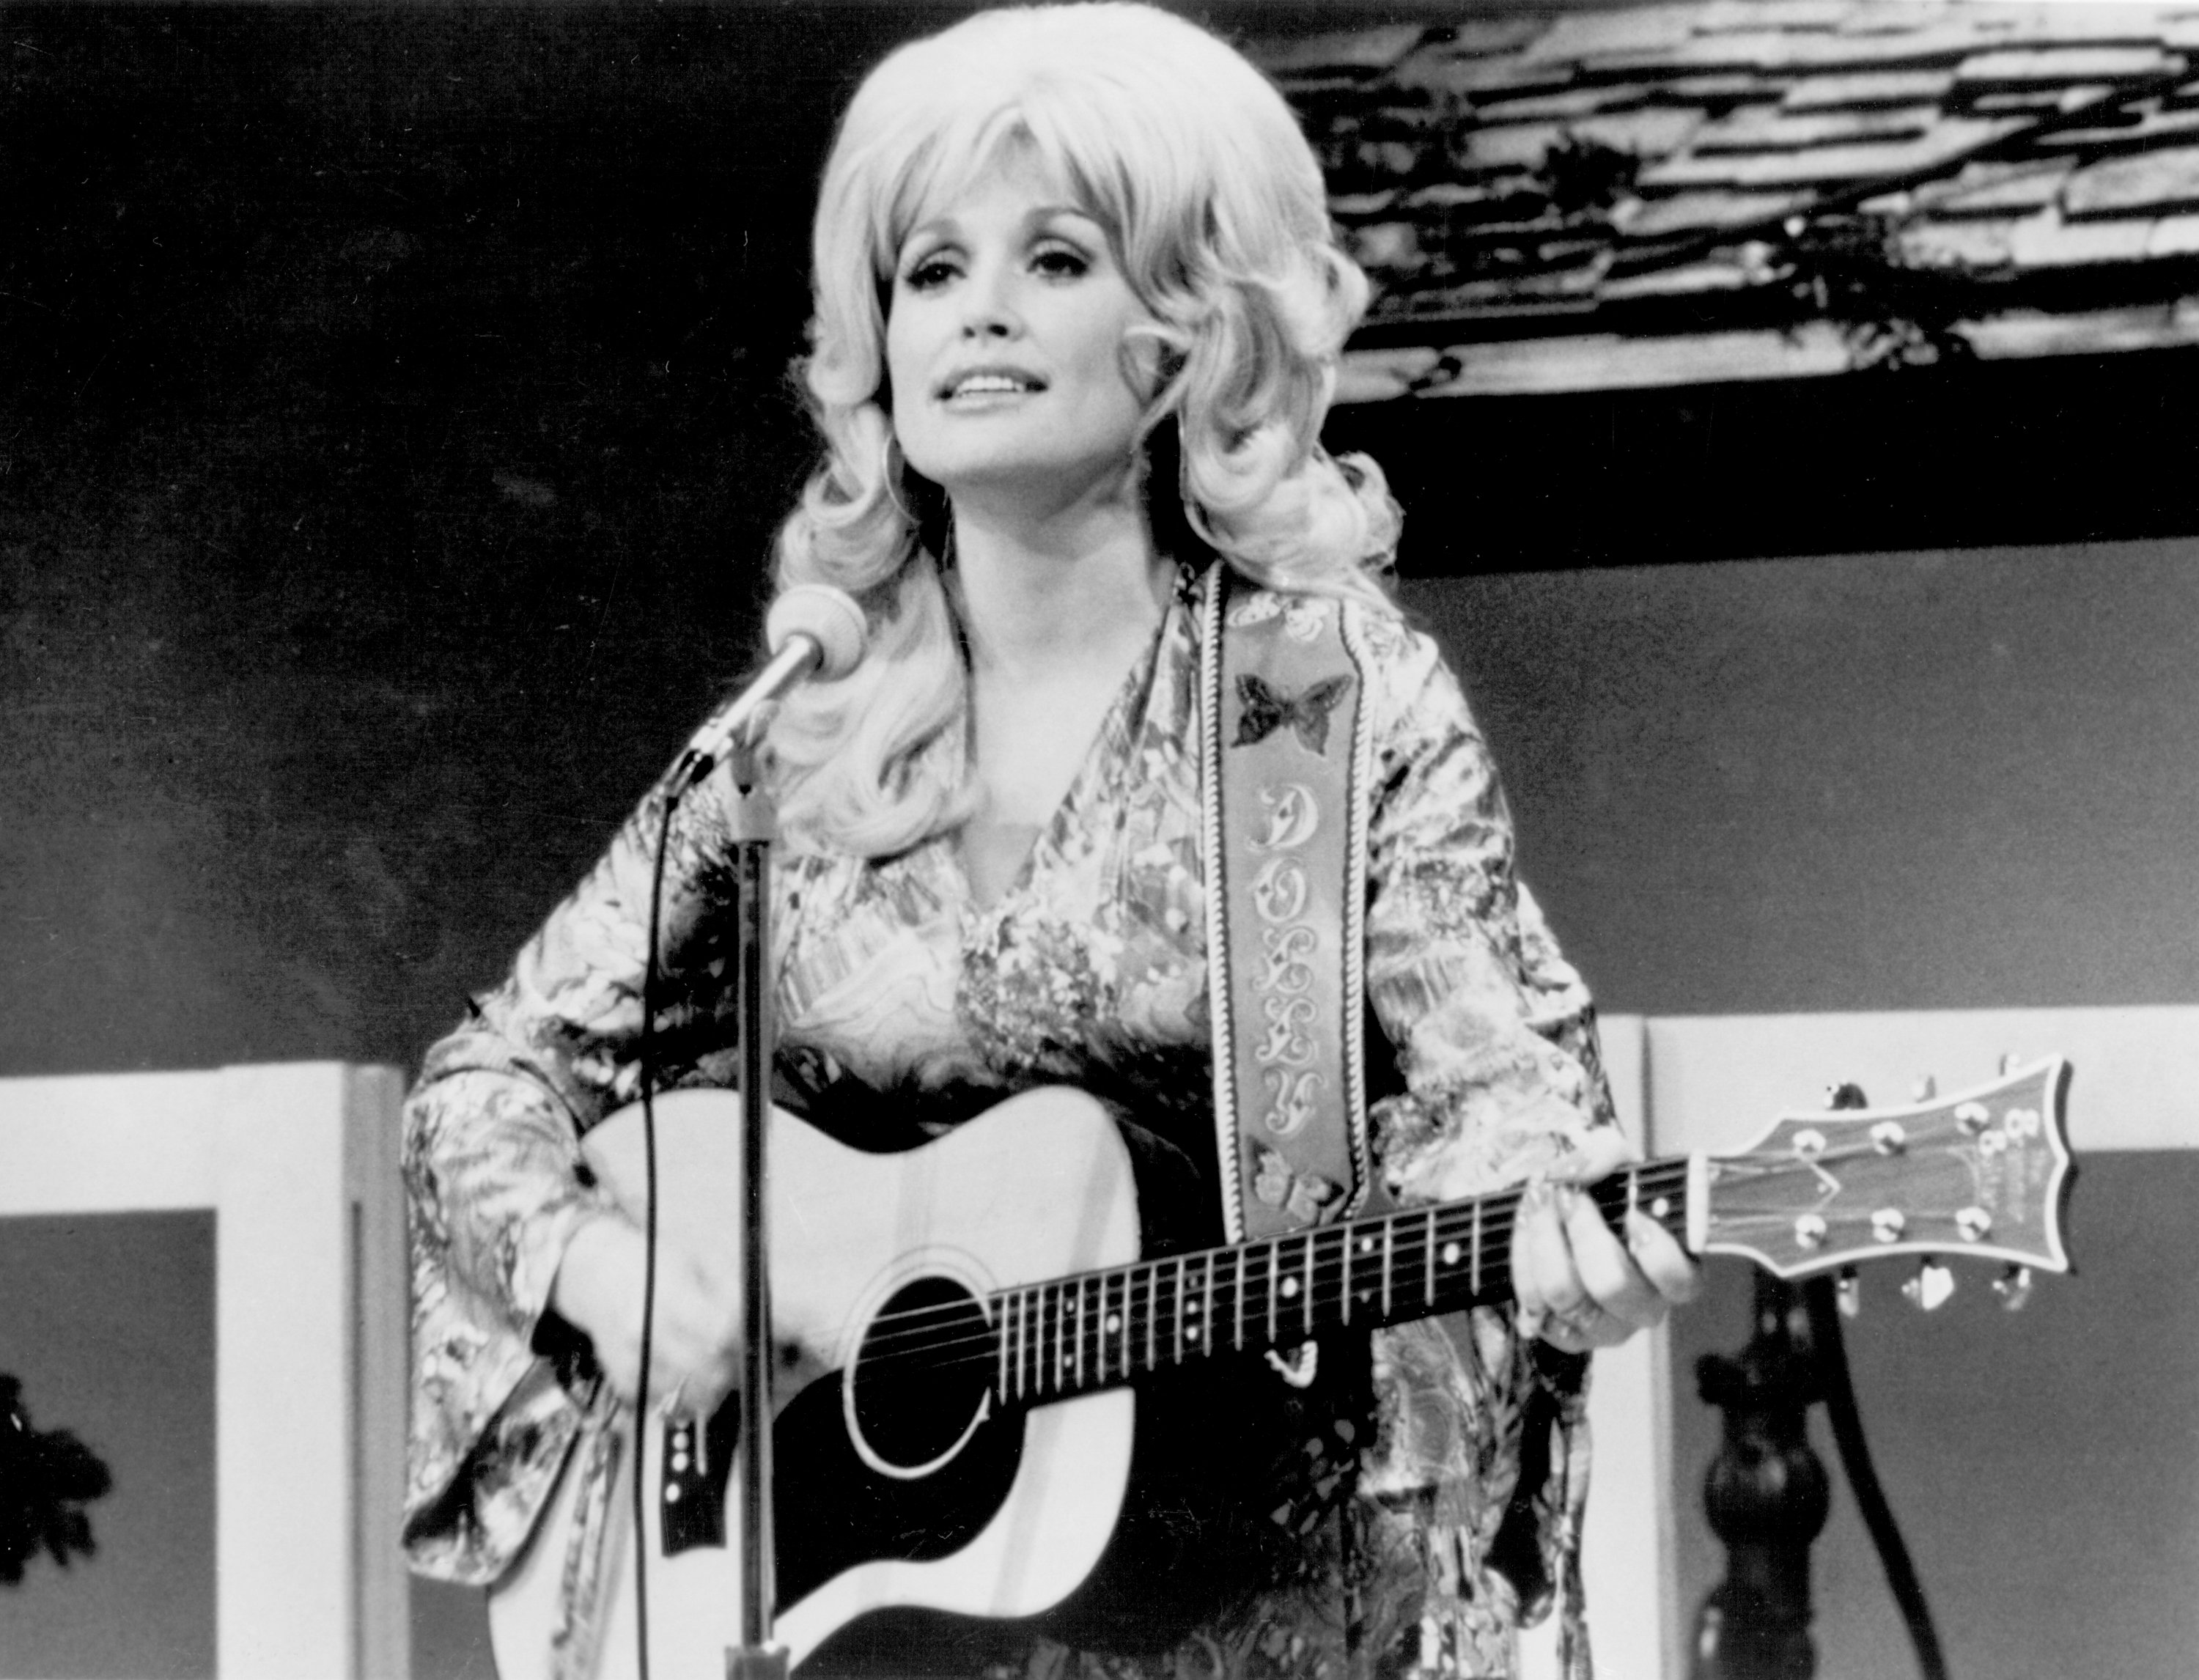 Dolly Parton with her guitar